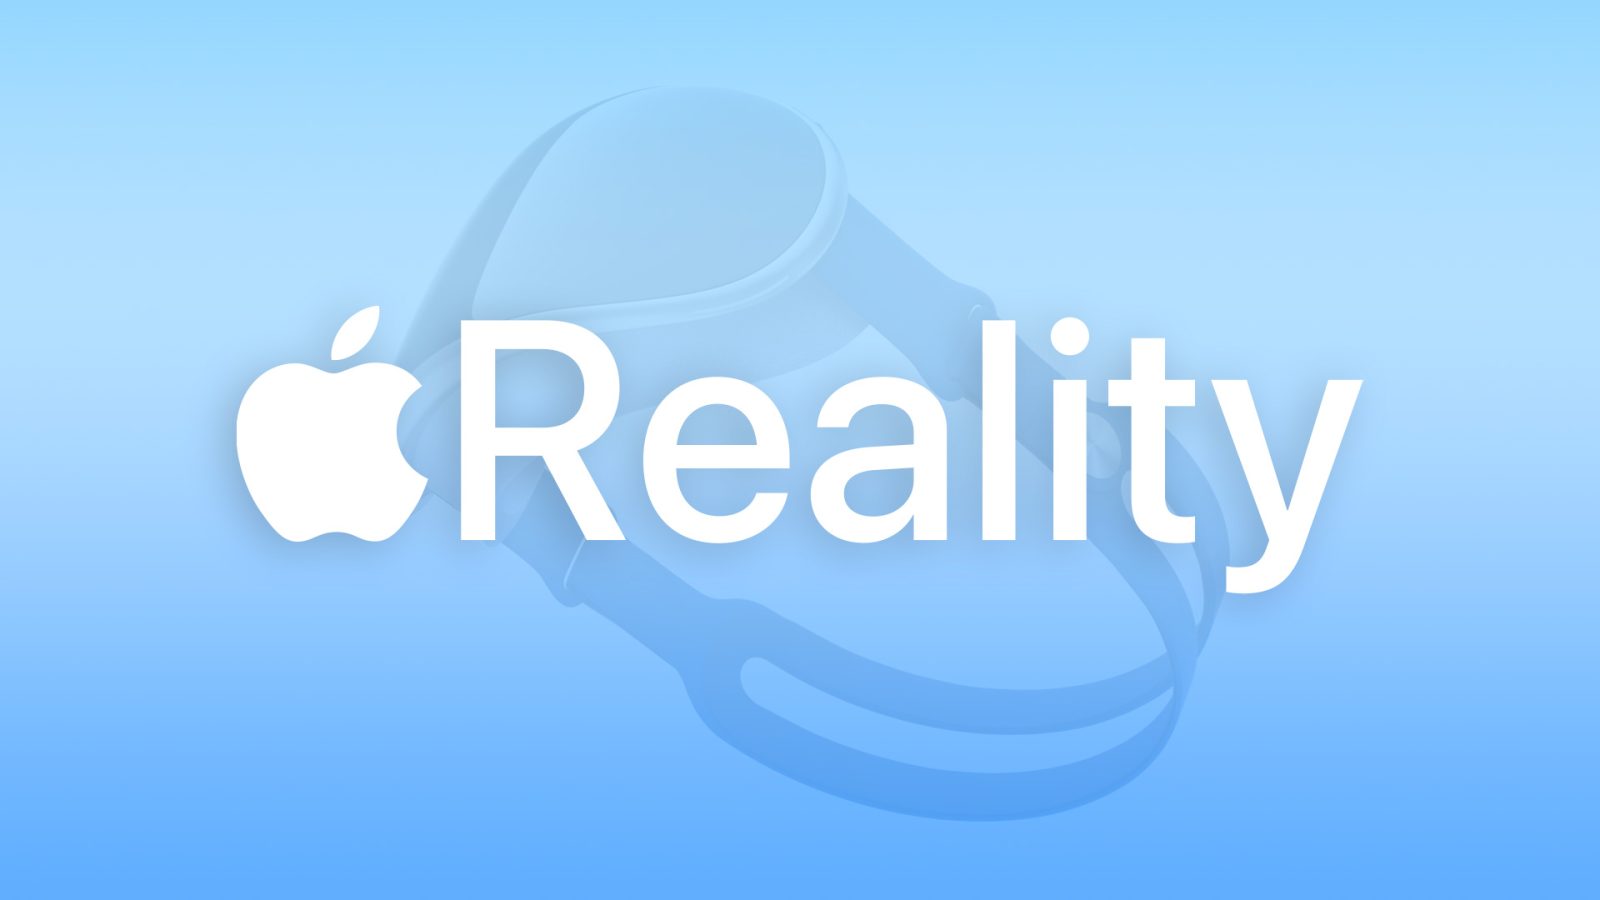 Apple could be planning two different operating systems for its headset ecosystem: xrOS and realityOS